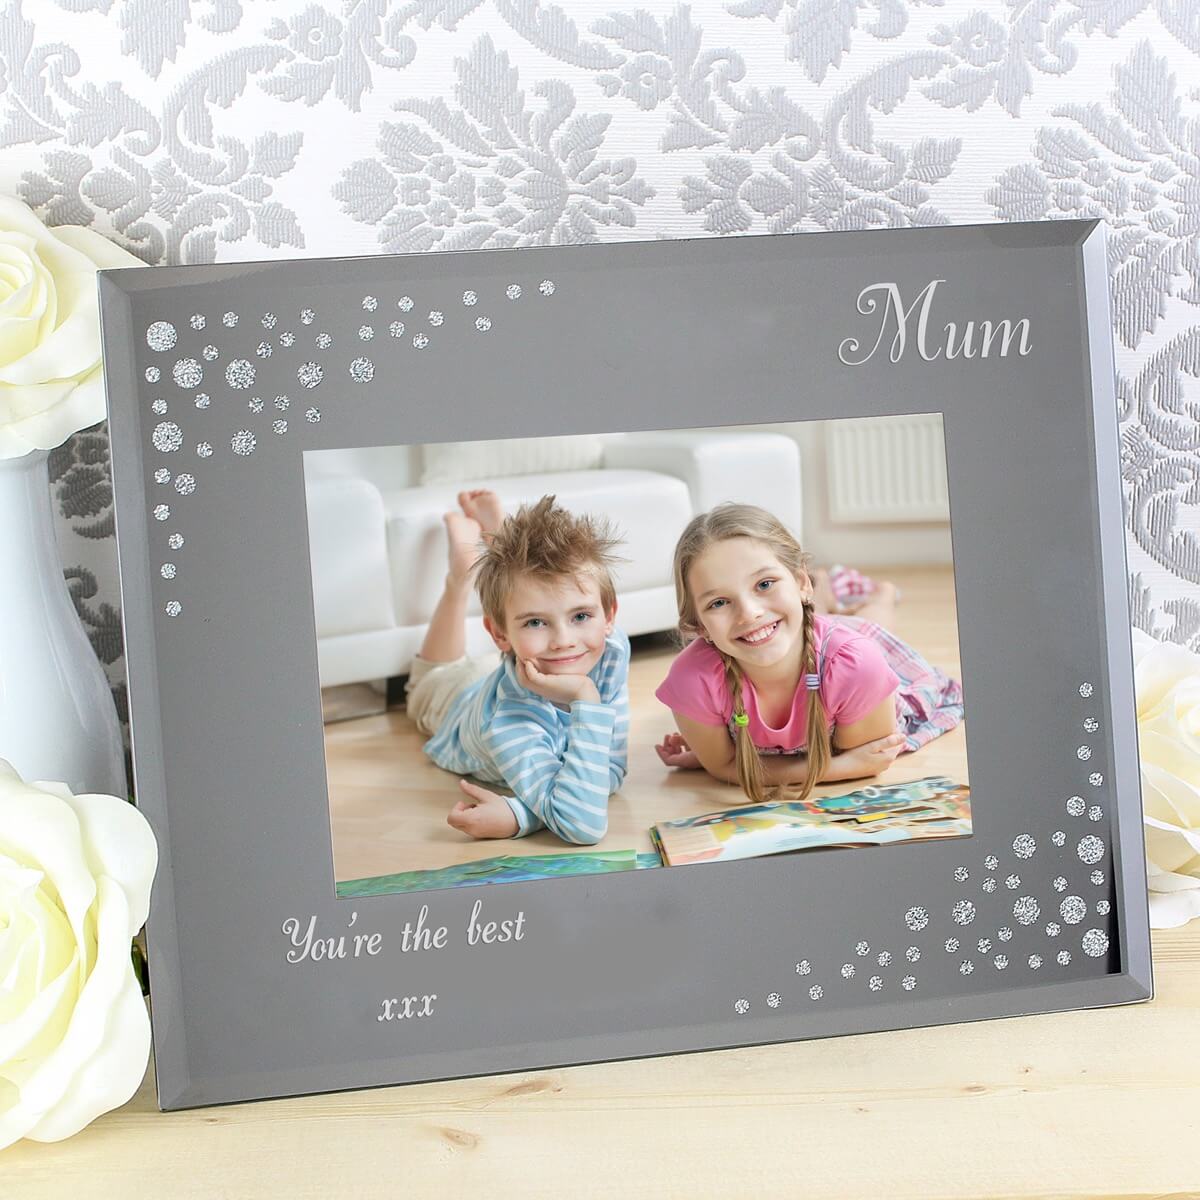 Personalised Any Message 6×4 Landscape Diamante Glass Photo Frame